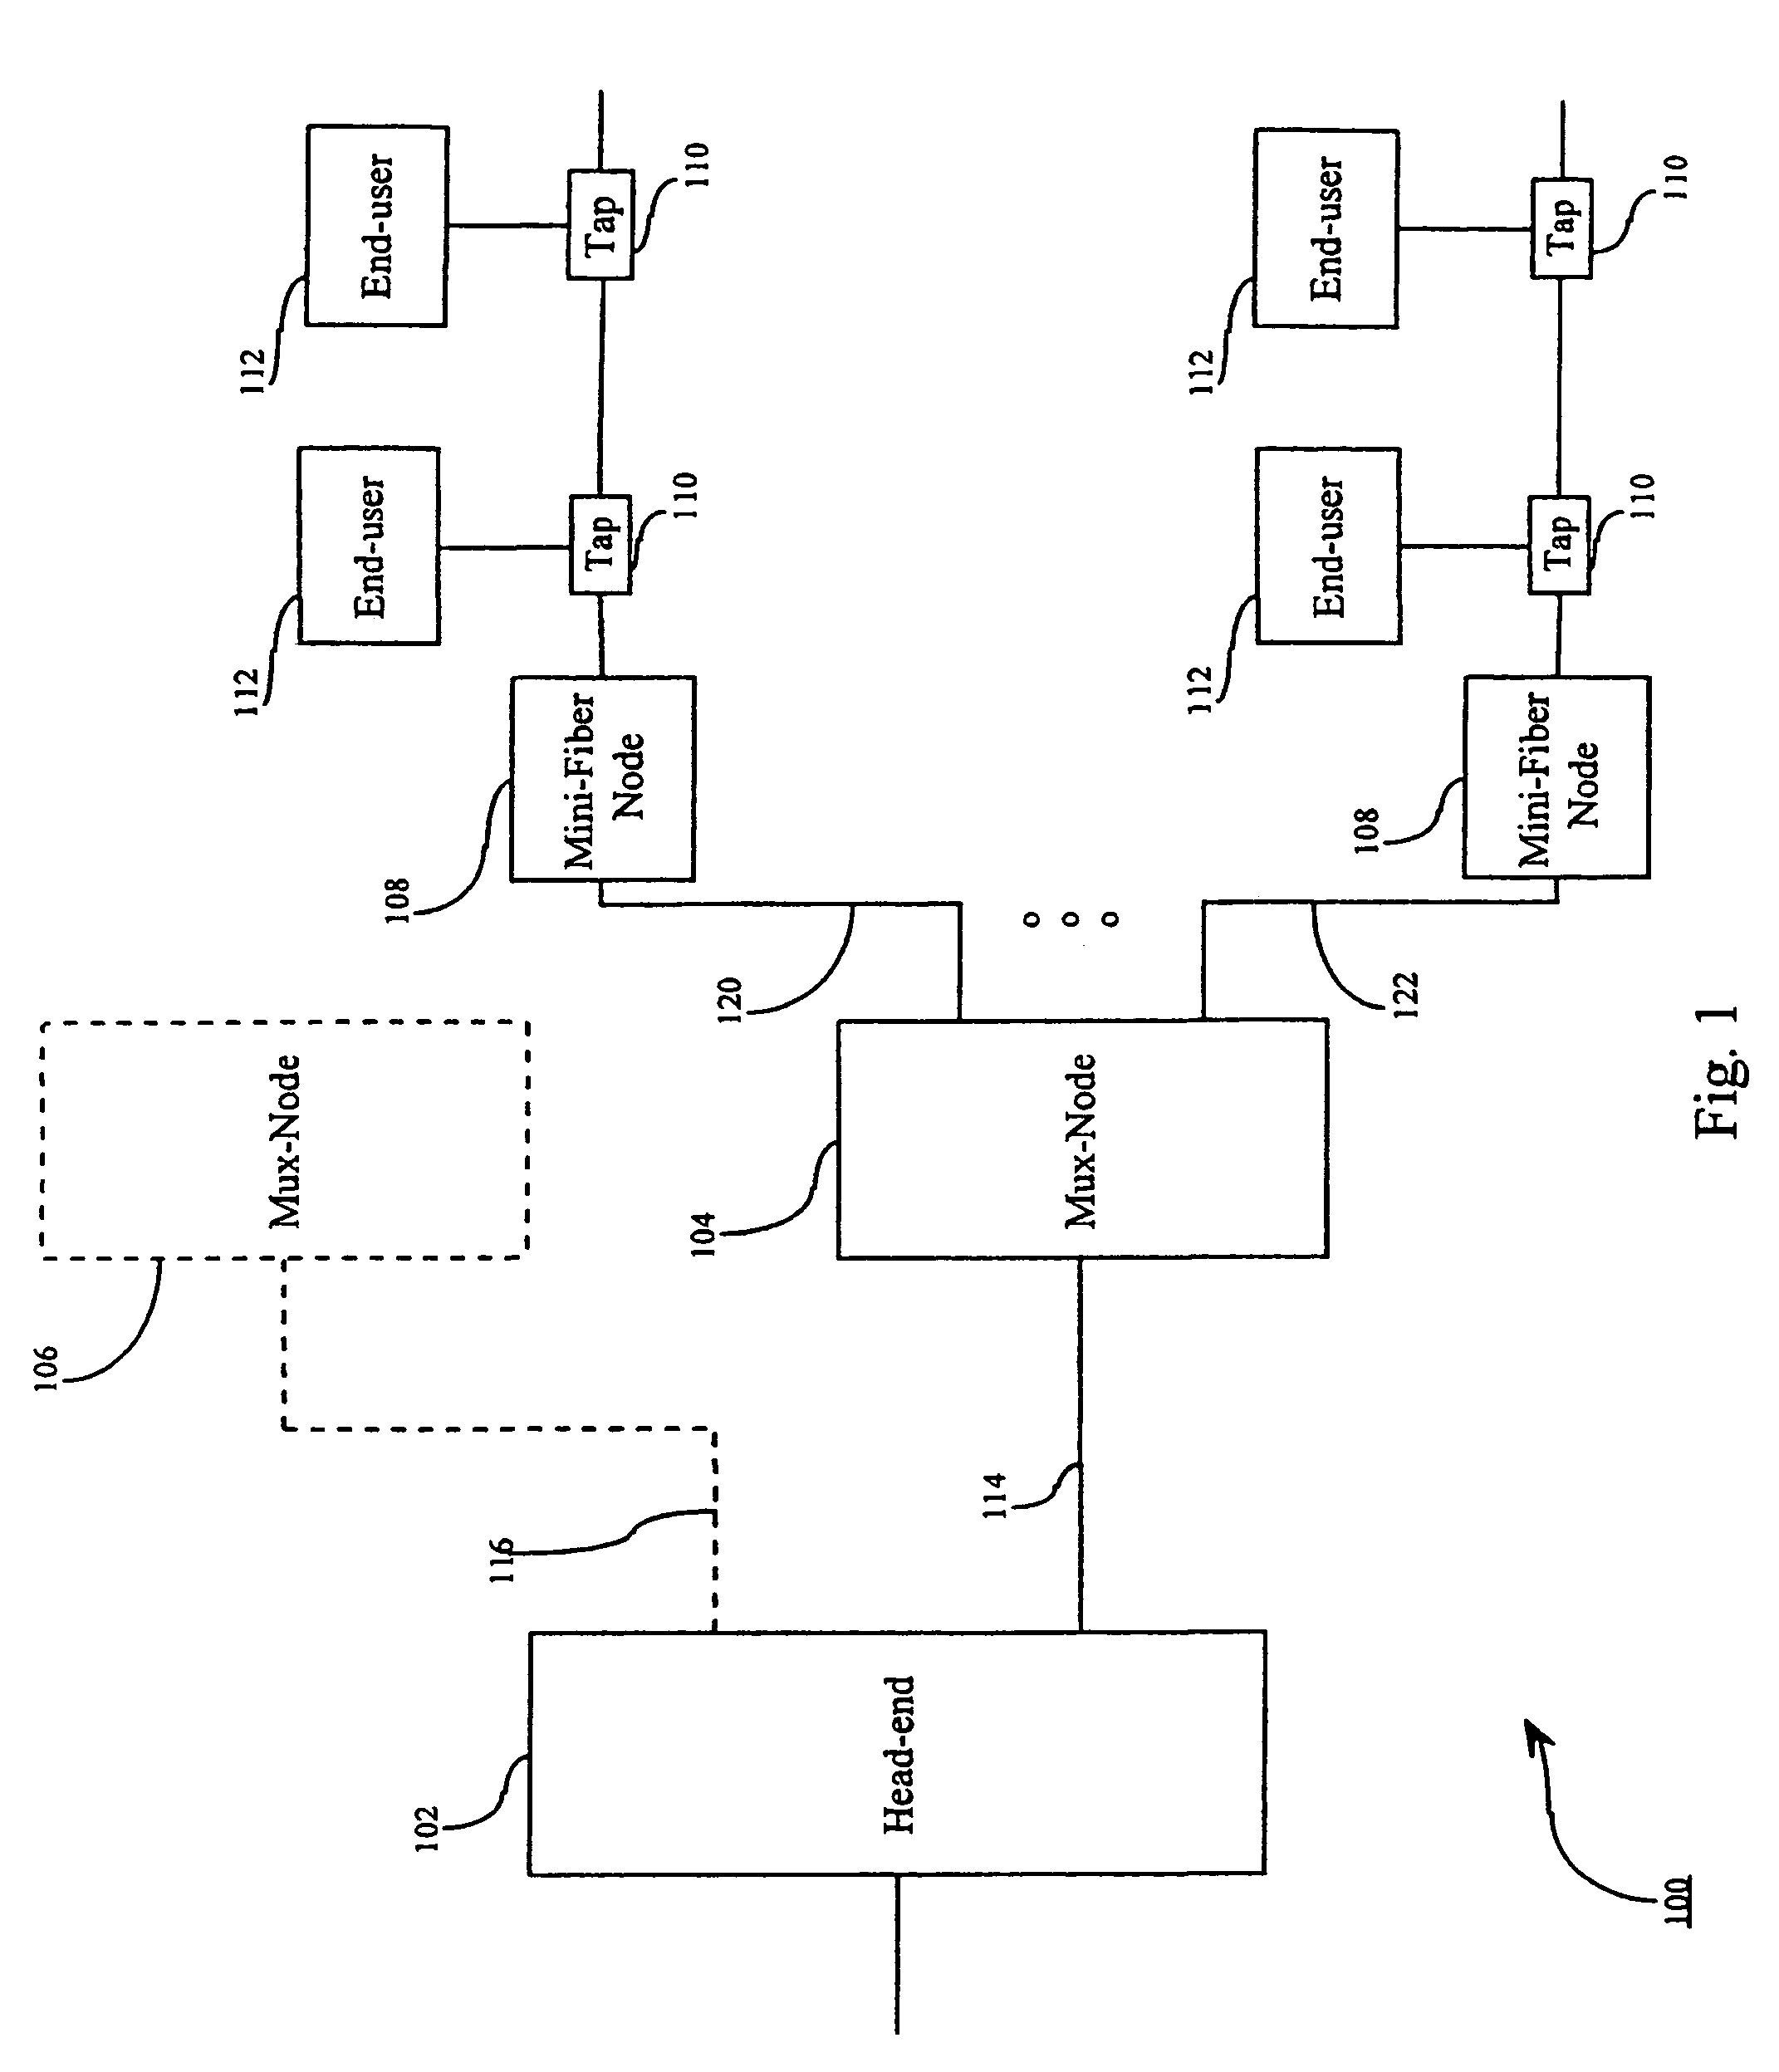 Fiber and wire communication system